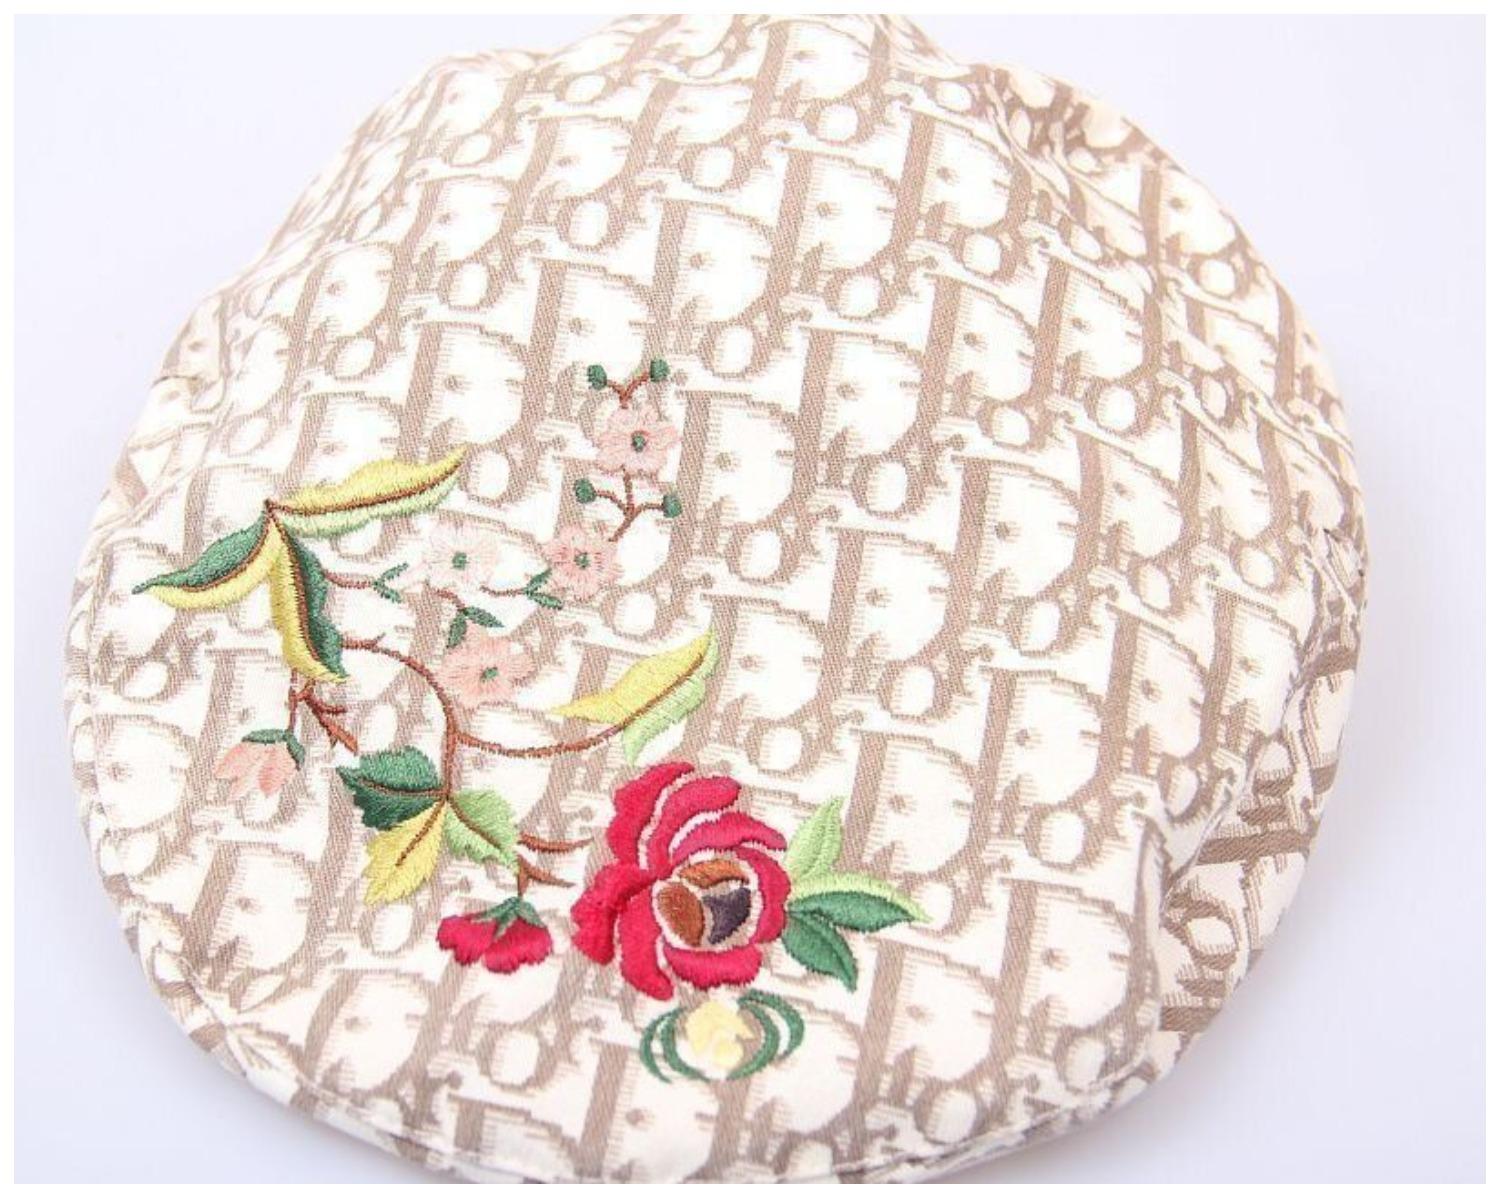 Christian Dior by Galliano flower Trotter cap SZ 58 For Sale 5